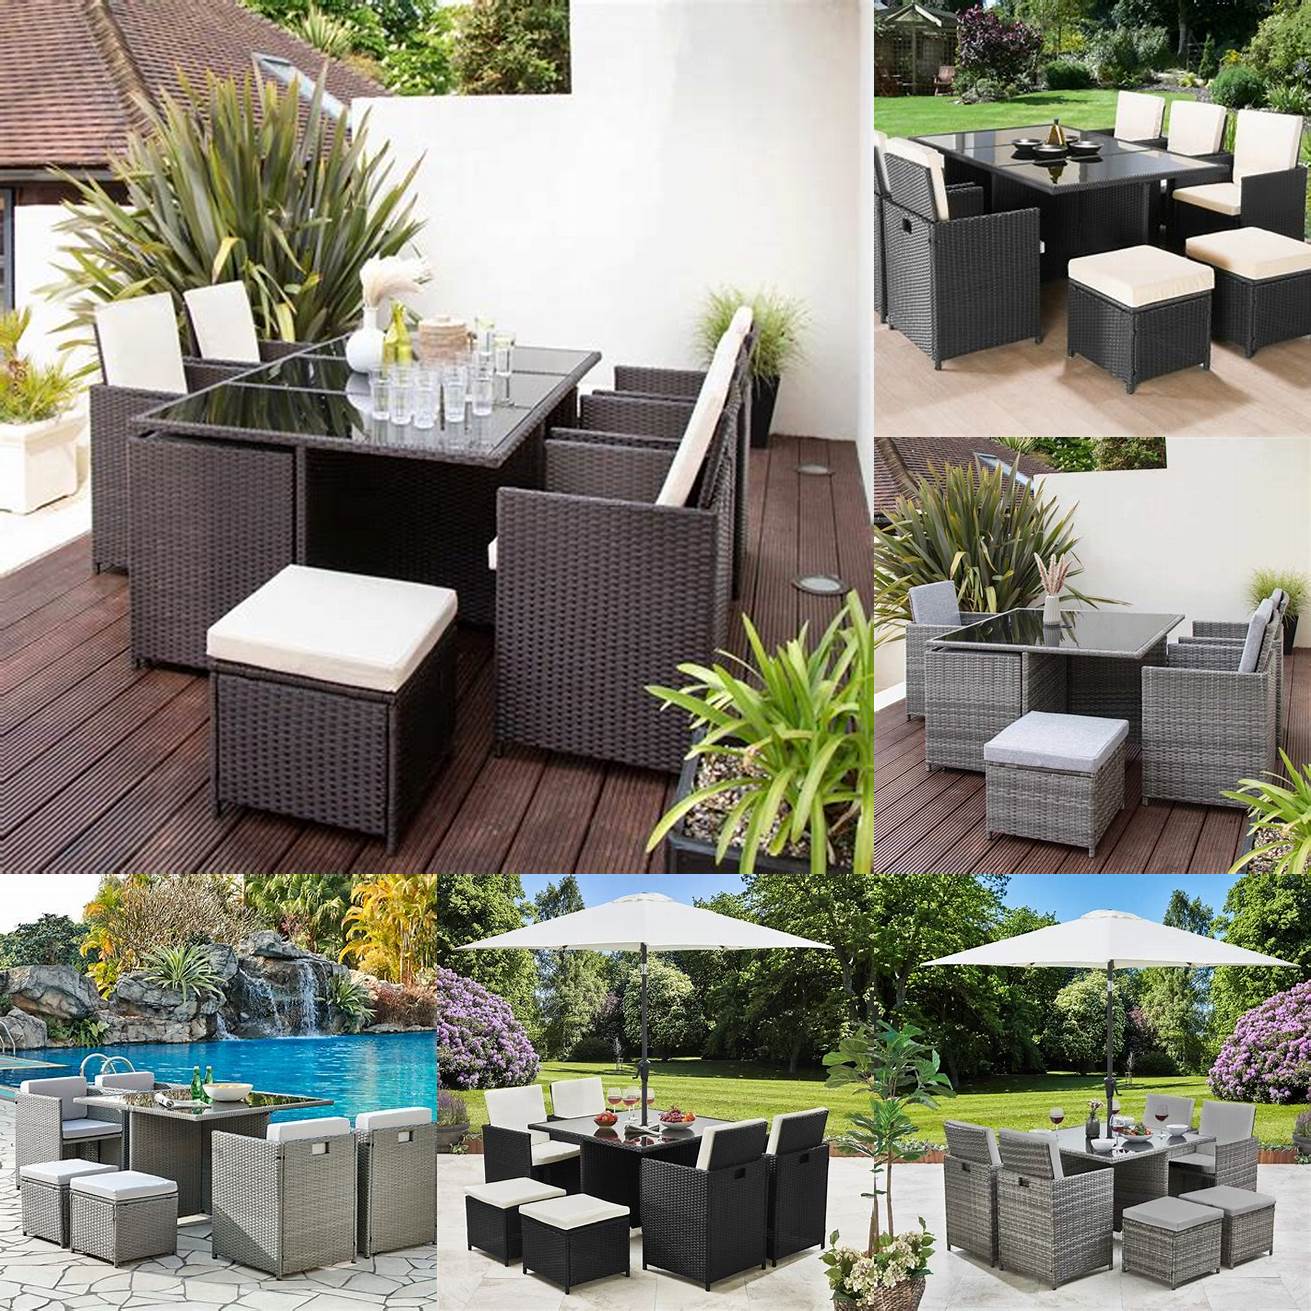 Cube outdoor seating in a patio